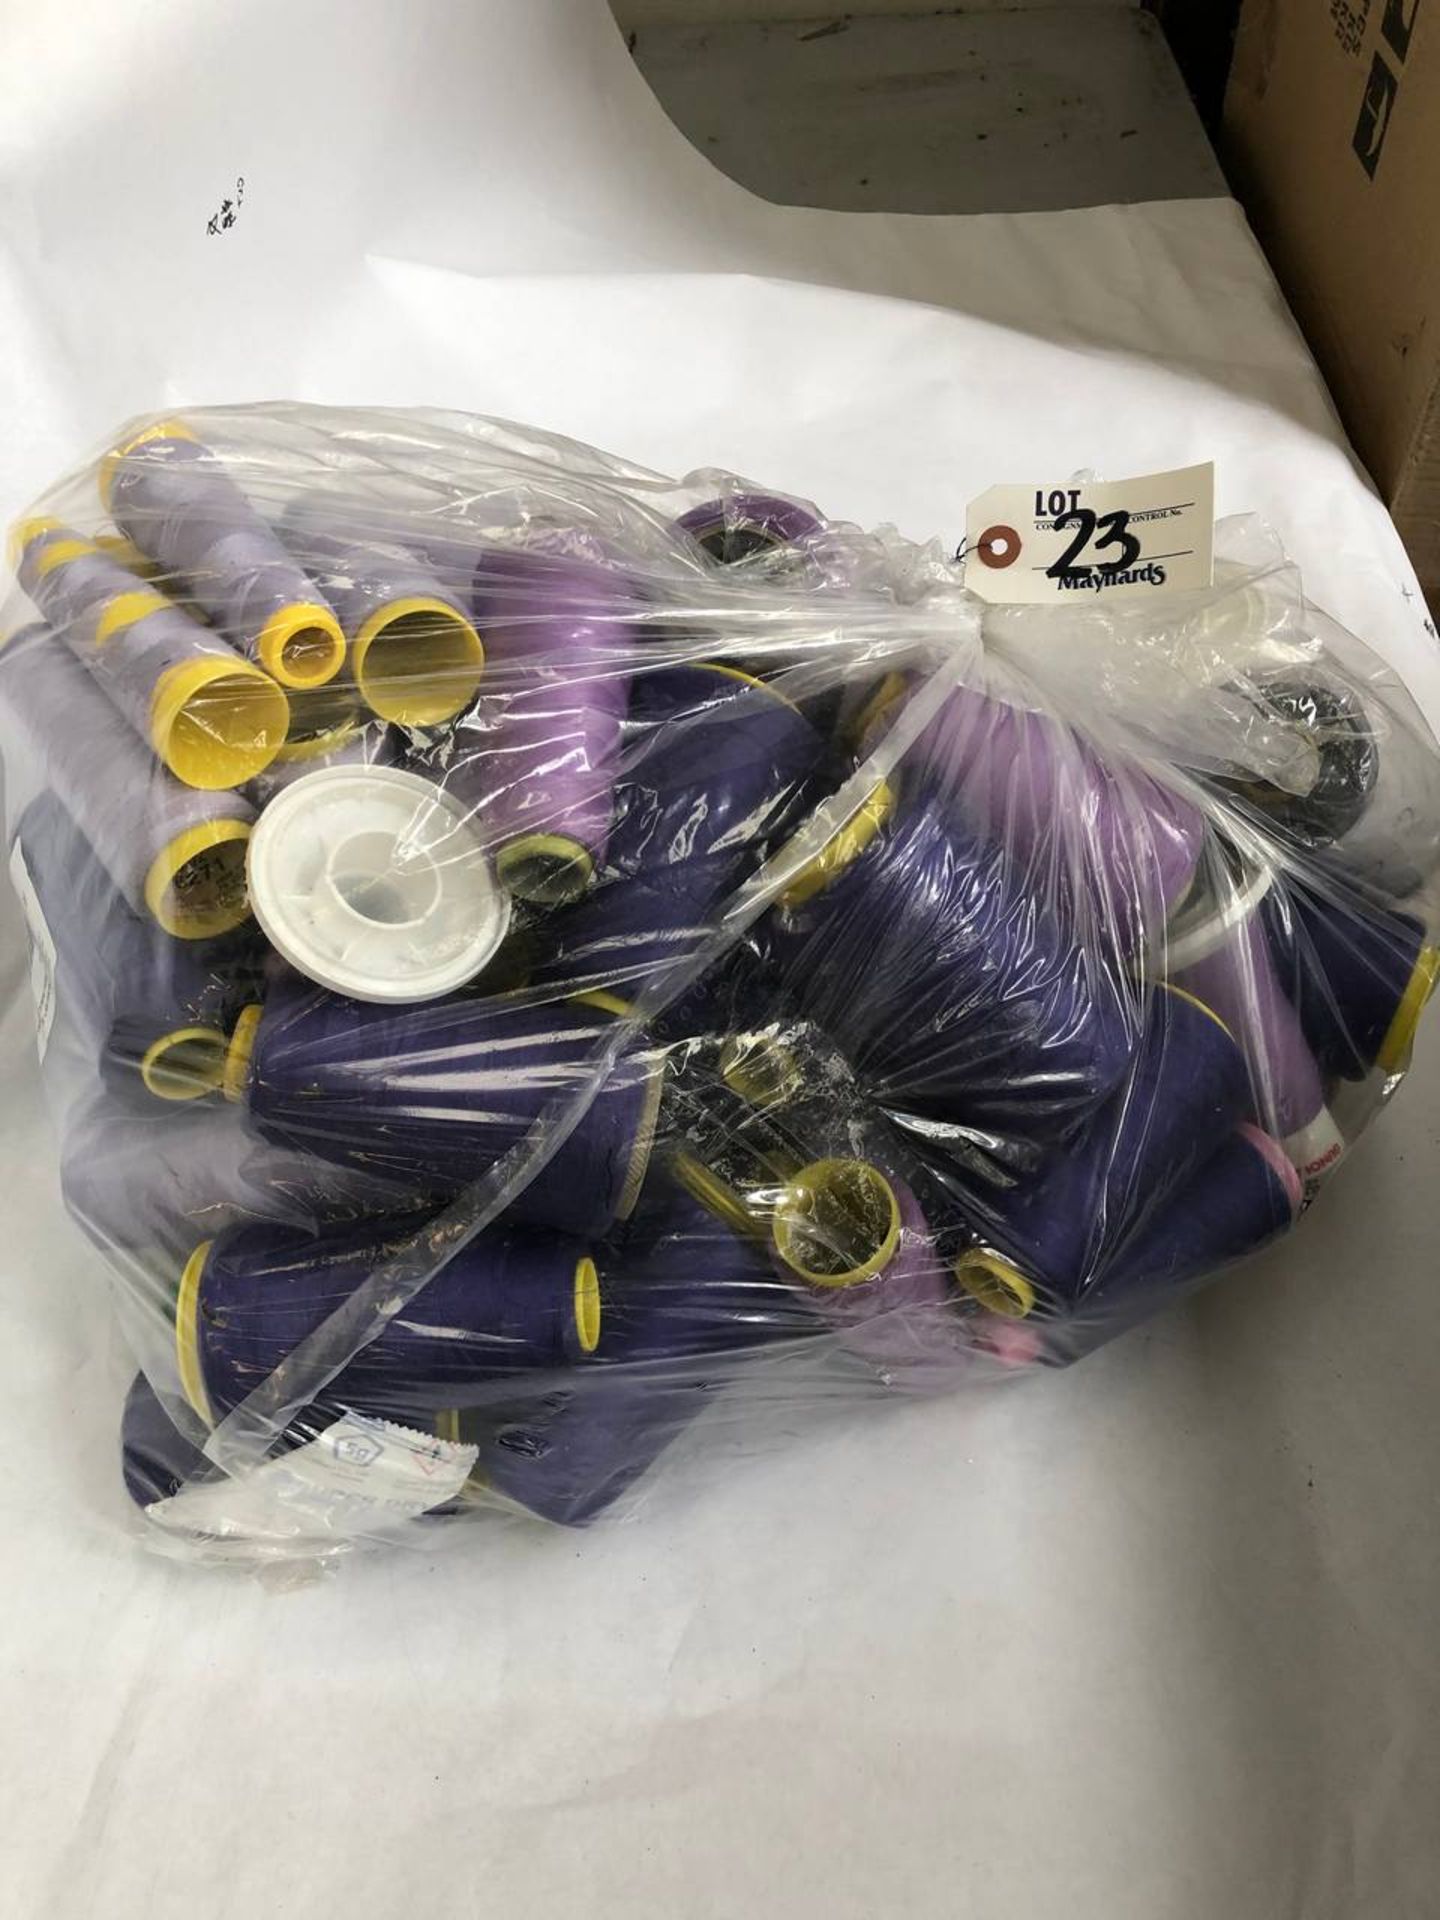 Bag of assorted purple colored thread rolls